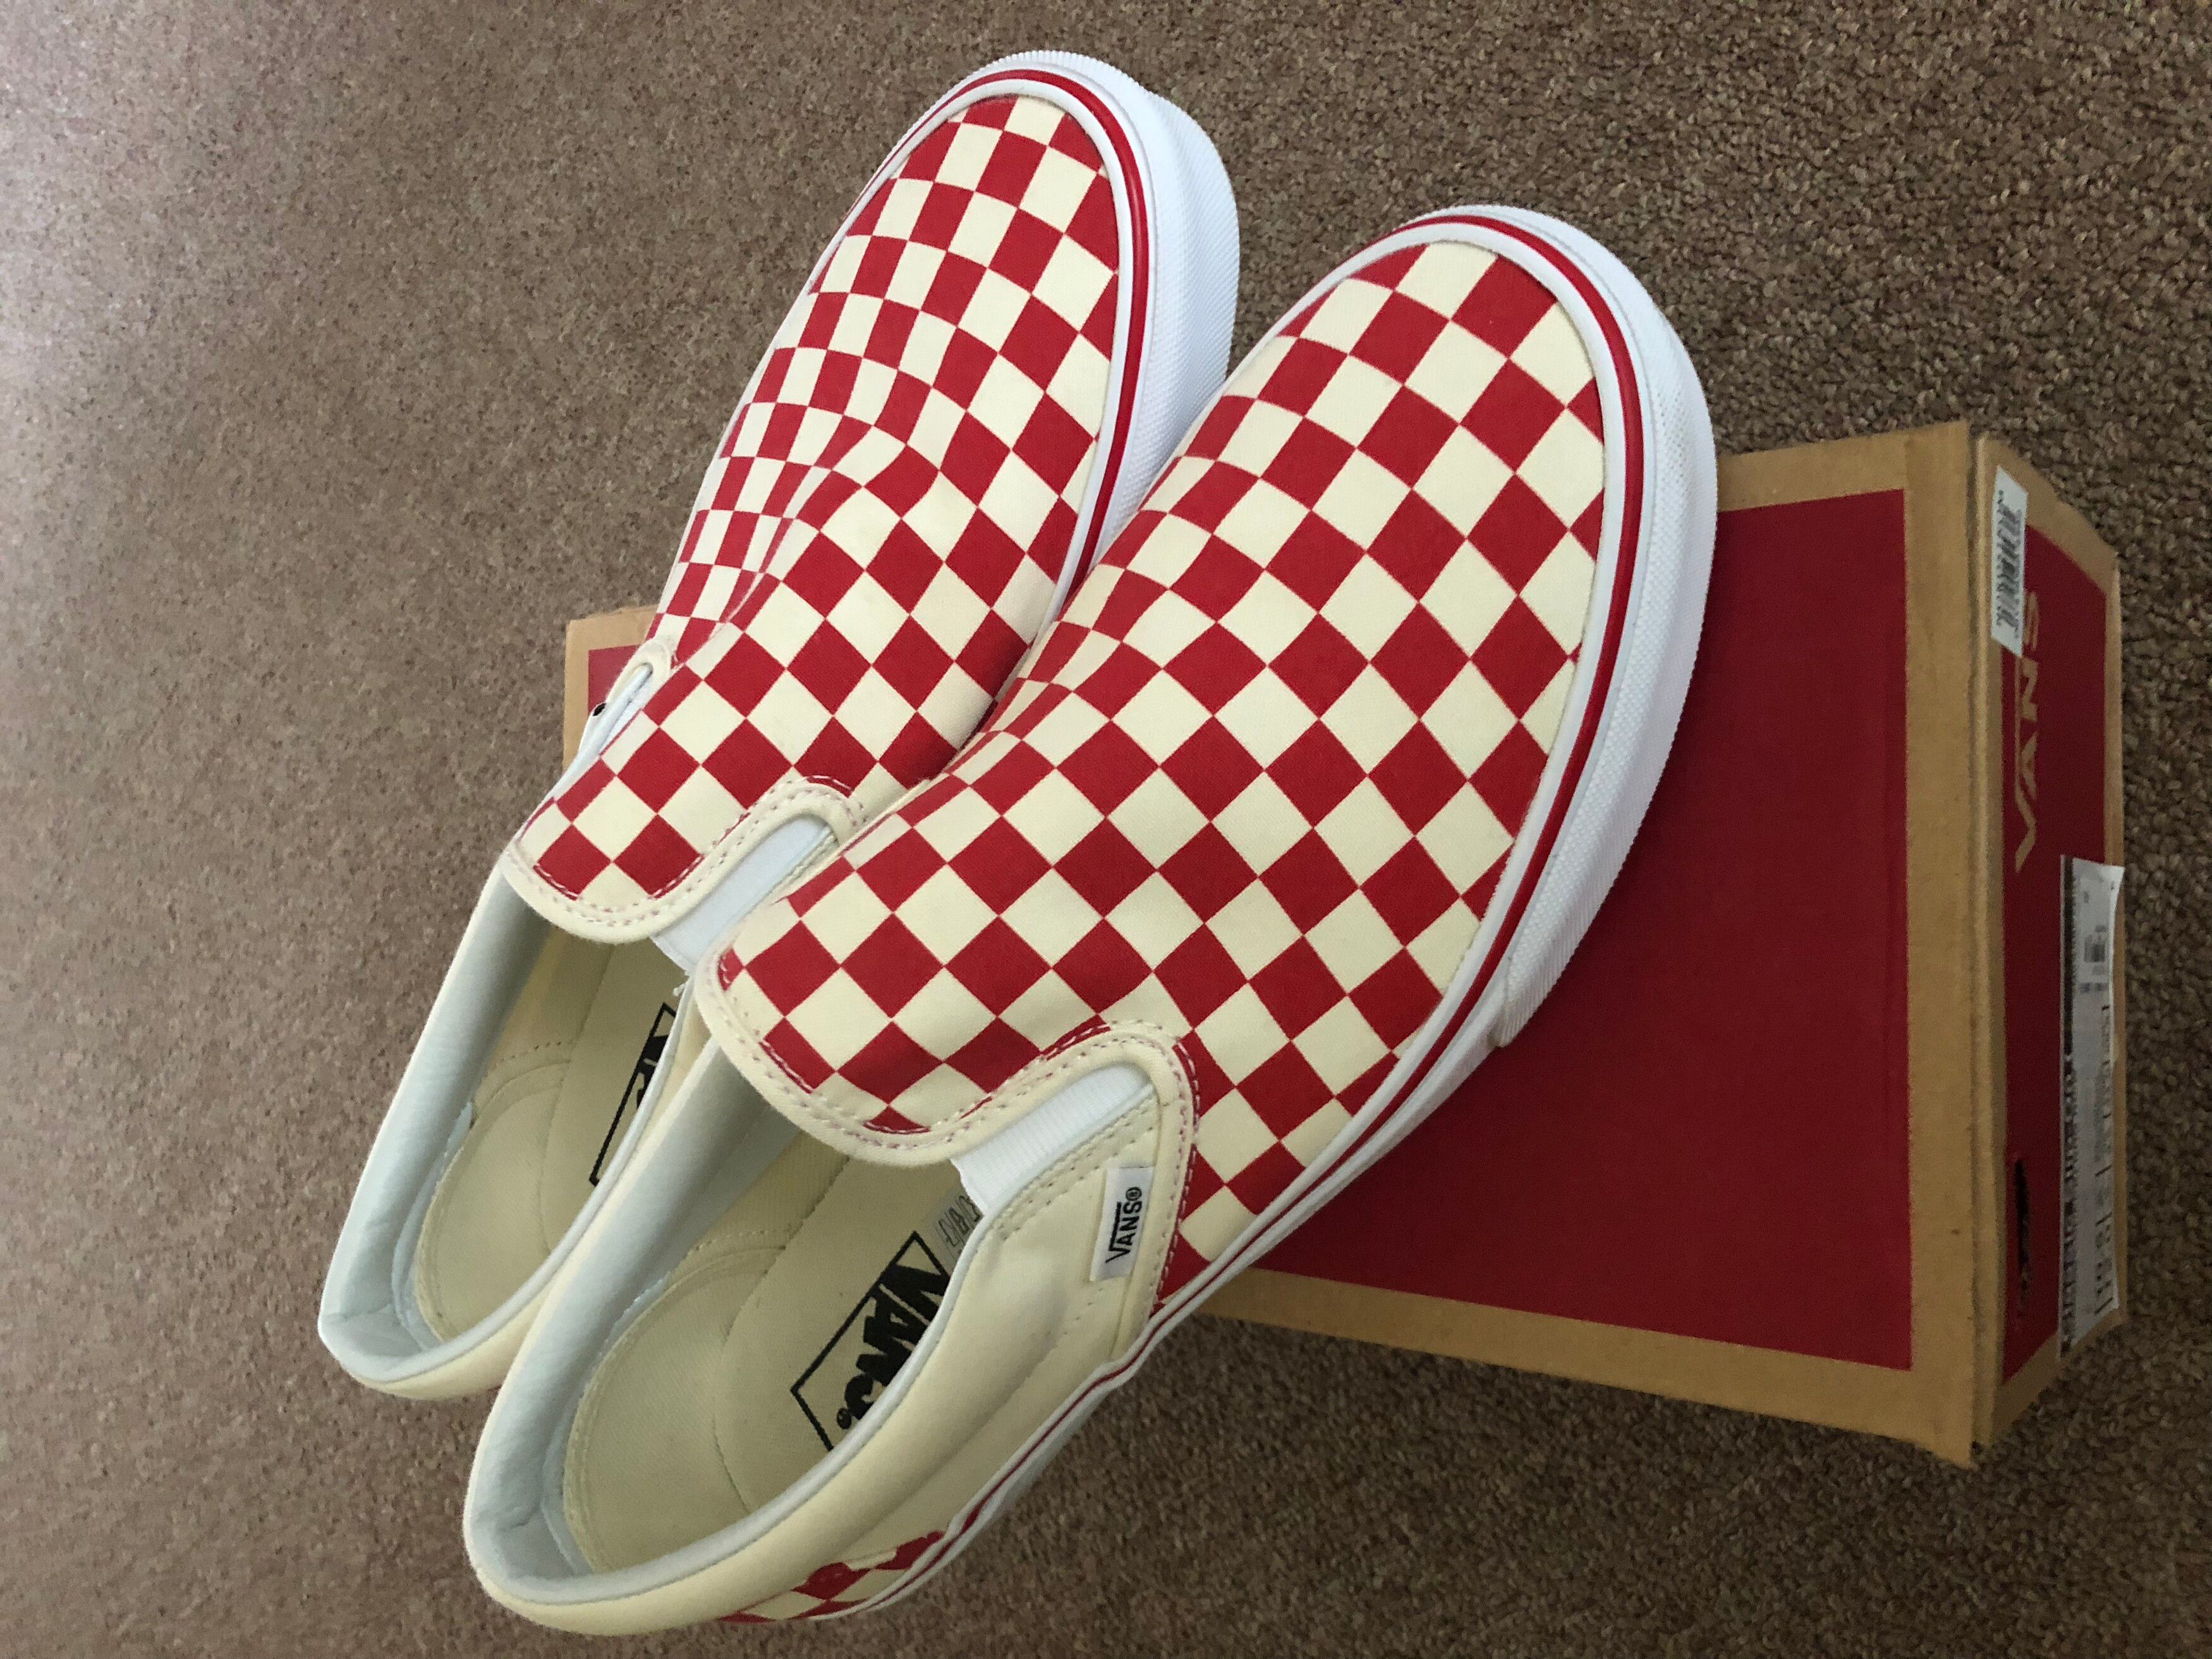 Vans Checkered red slip on Size US 10.5 / EU 43-44 - 1 Preview